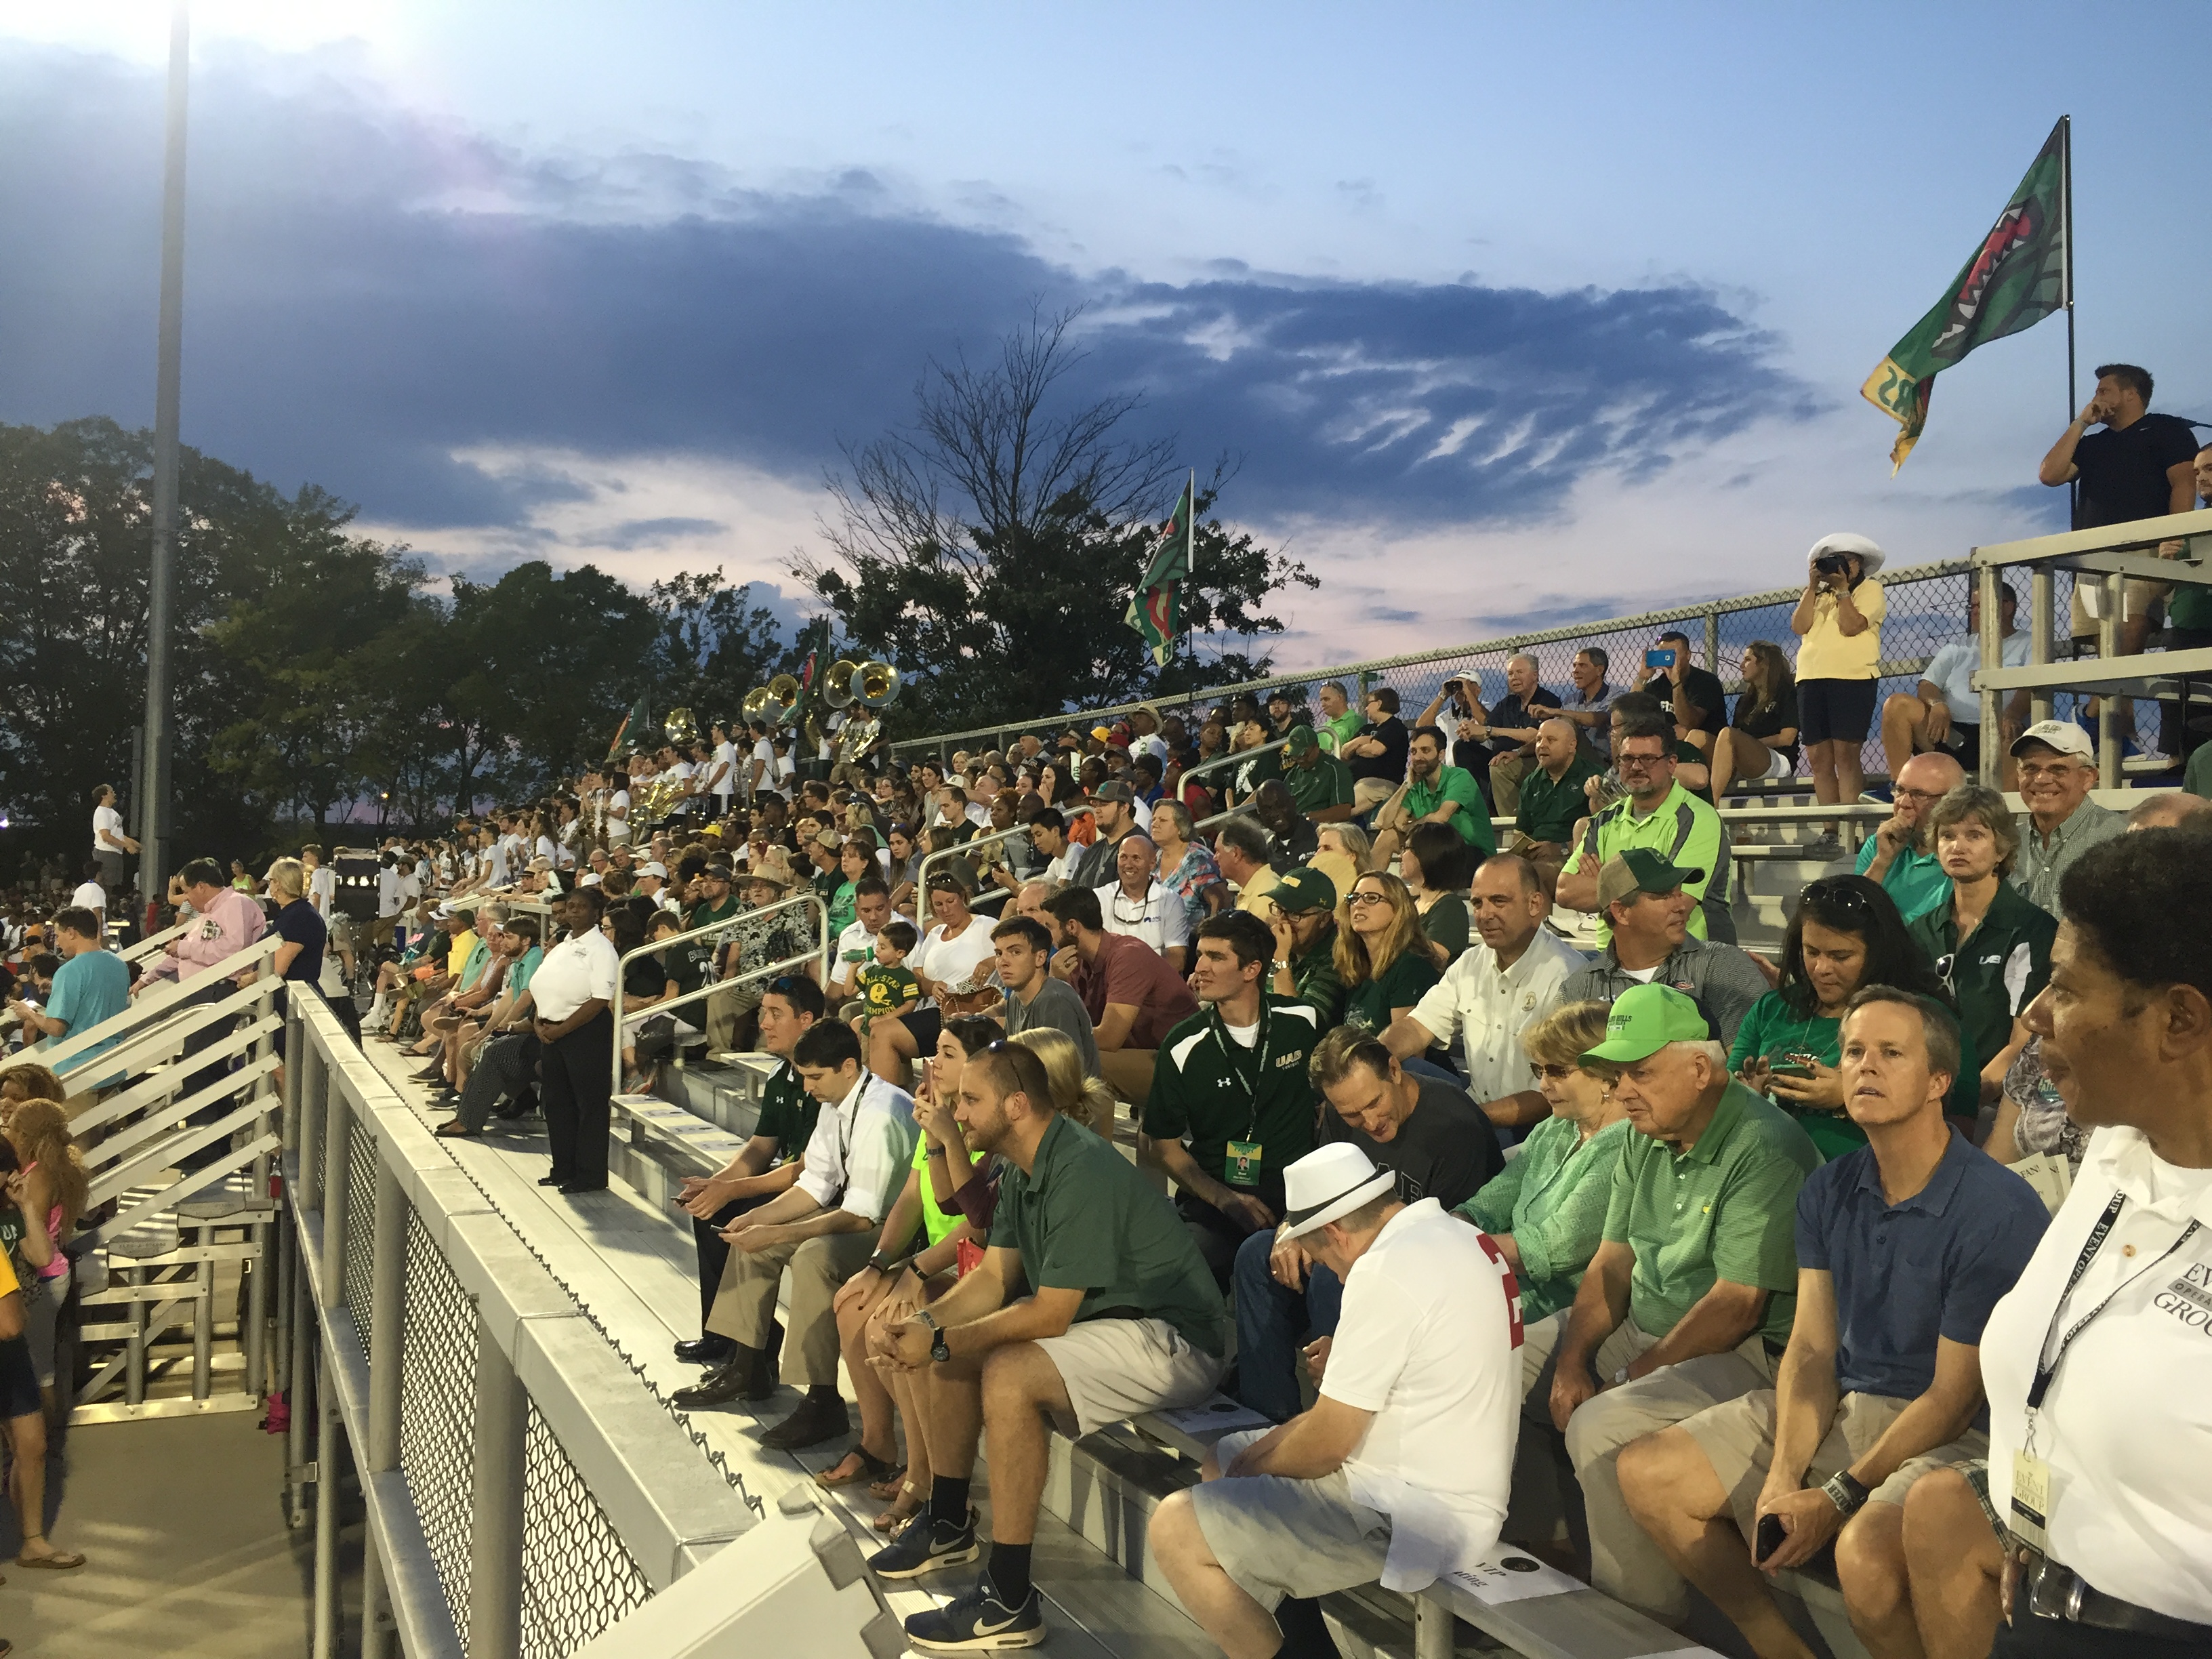 An estimated 4,500 people, including nearly 2,000 students, attended the game at the BBVA Compass soccer complex. Photo by Baili Grace Bigham